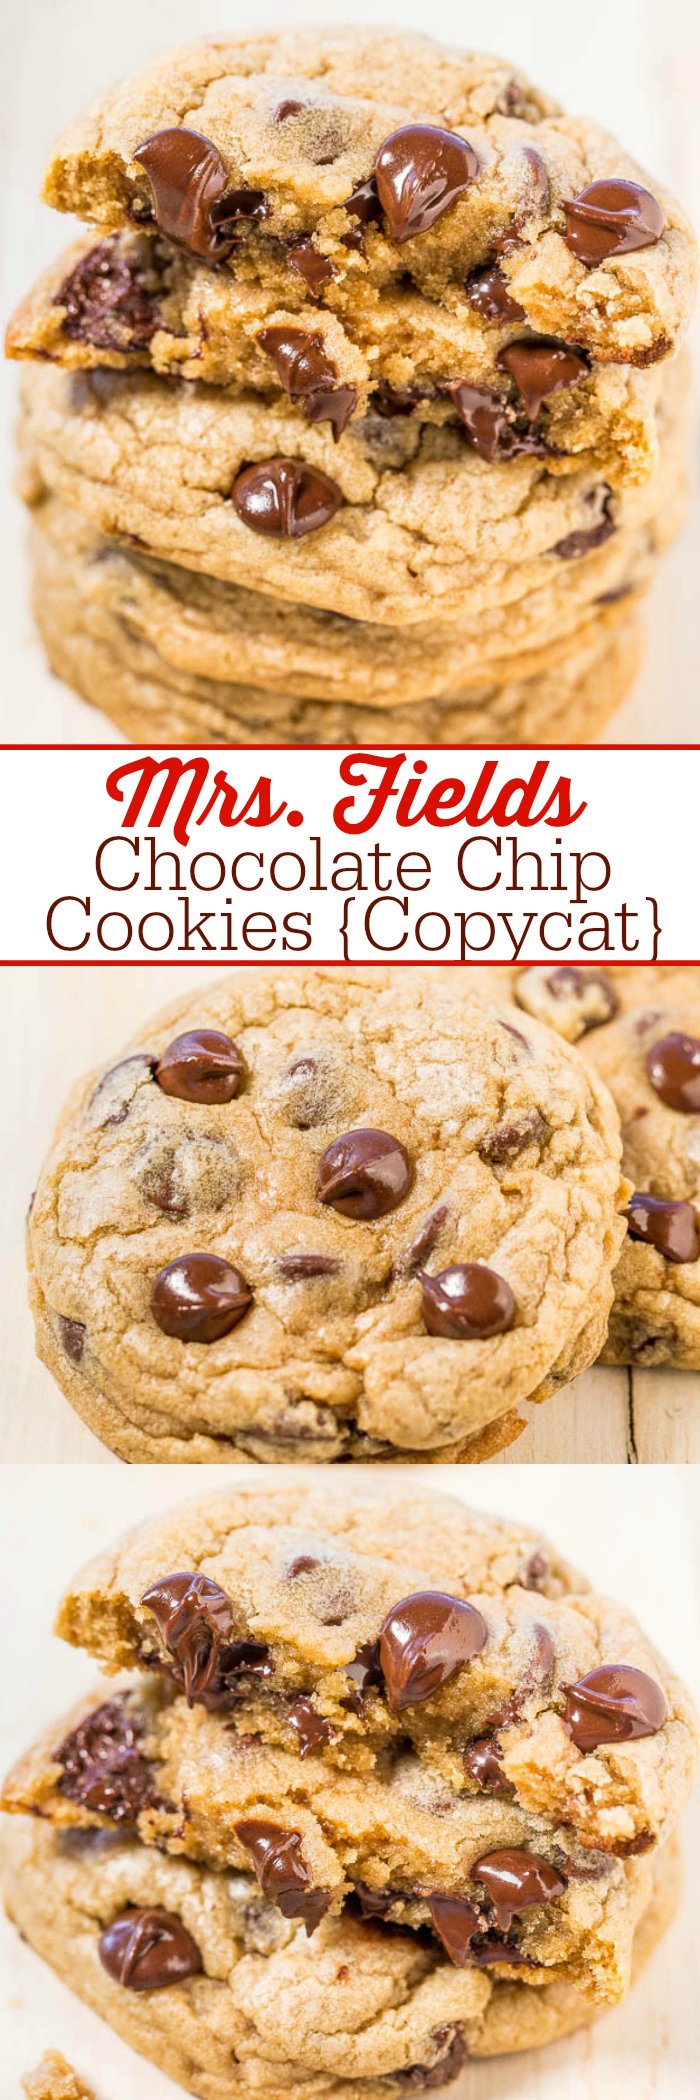 Mrs. Fields Chocolate Chip Cookies {Copycat} - Learn all the SECRETS to making the famous Mrs. Fields cookies at home!! The recipe is easy, spot-on, and they taste just like the real thing!! 